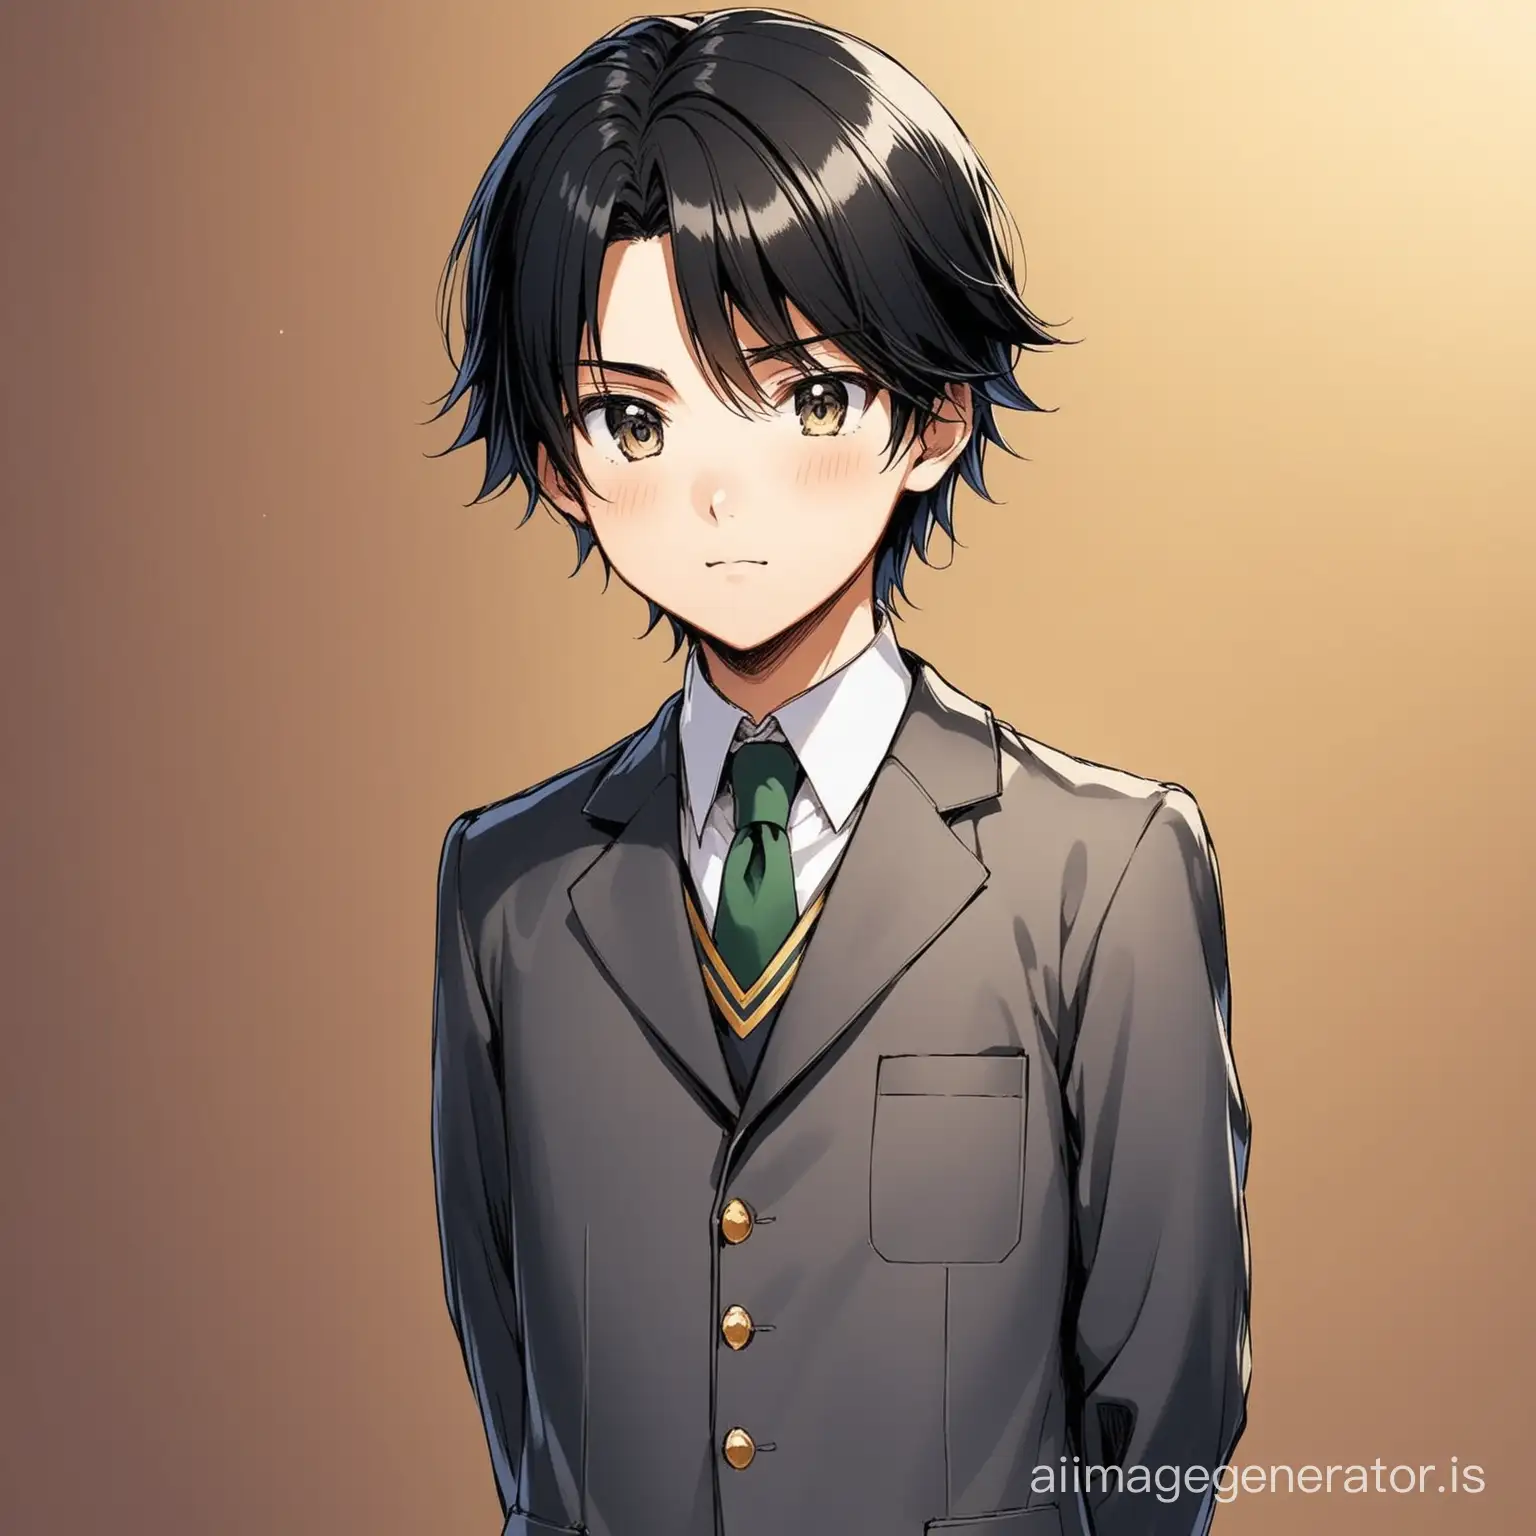 The black-haired prince wearing a 12-year-old school uniform